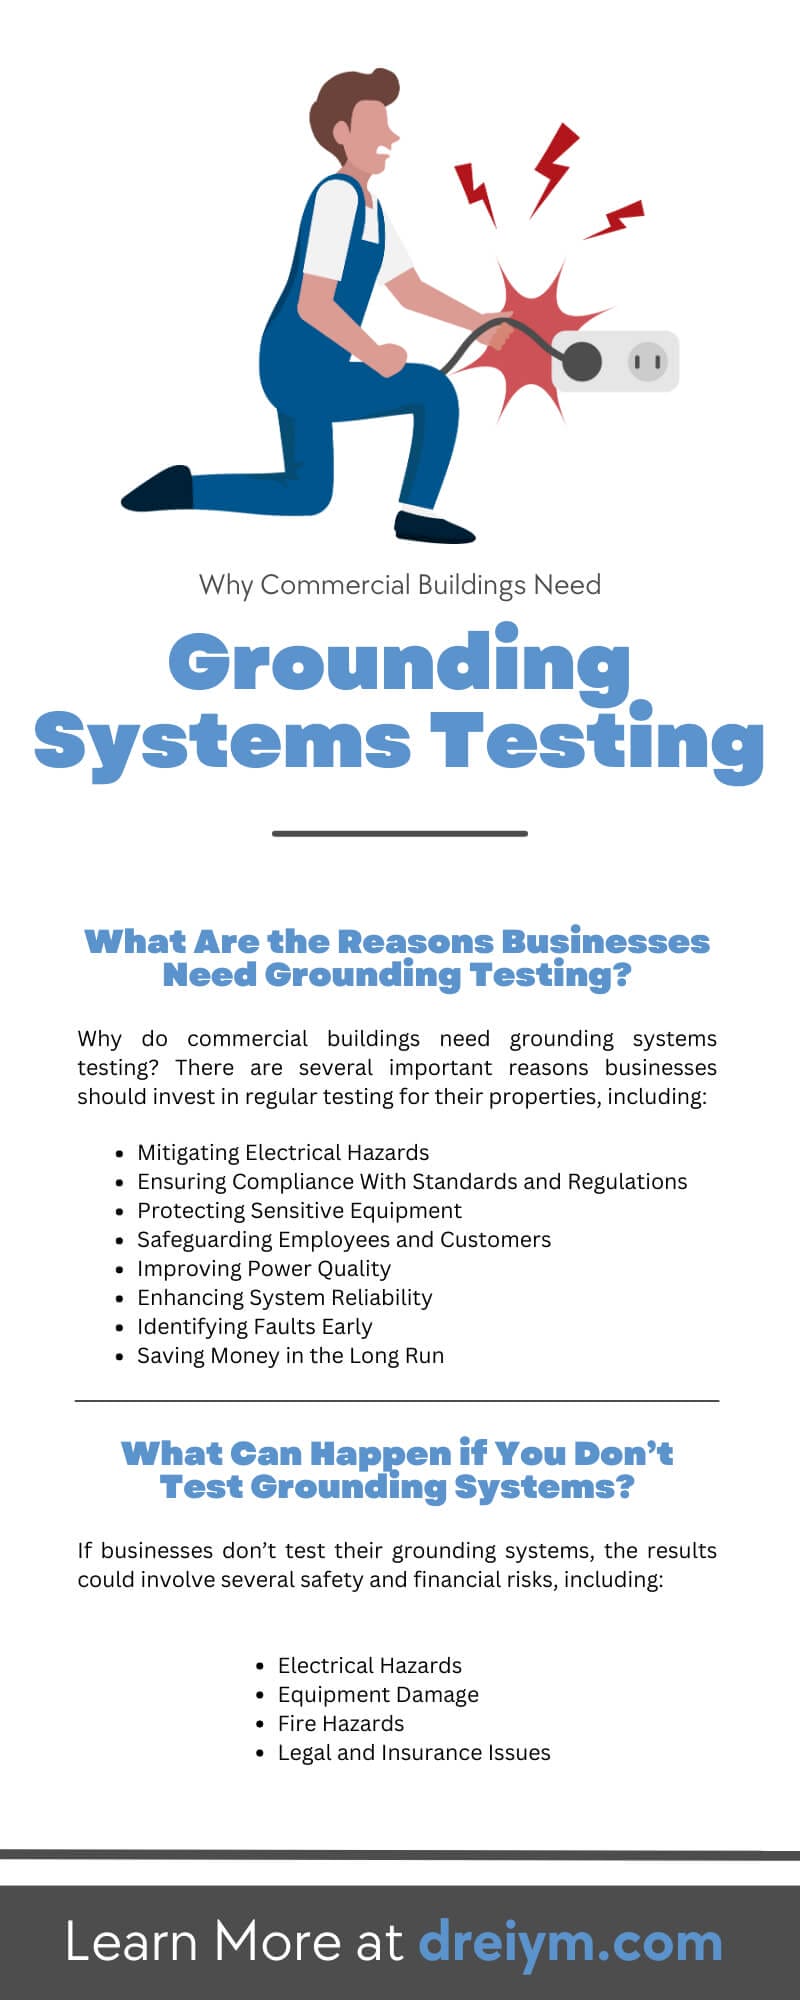 Why Commercial Buildings Need Grounding Systems Testing
